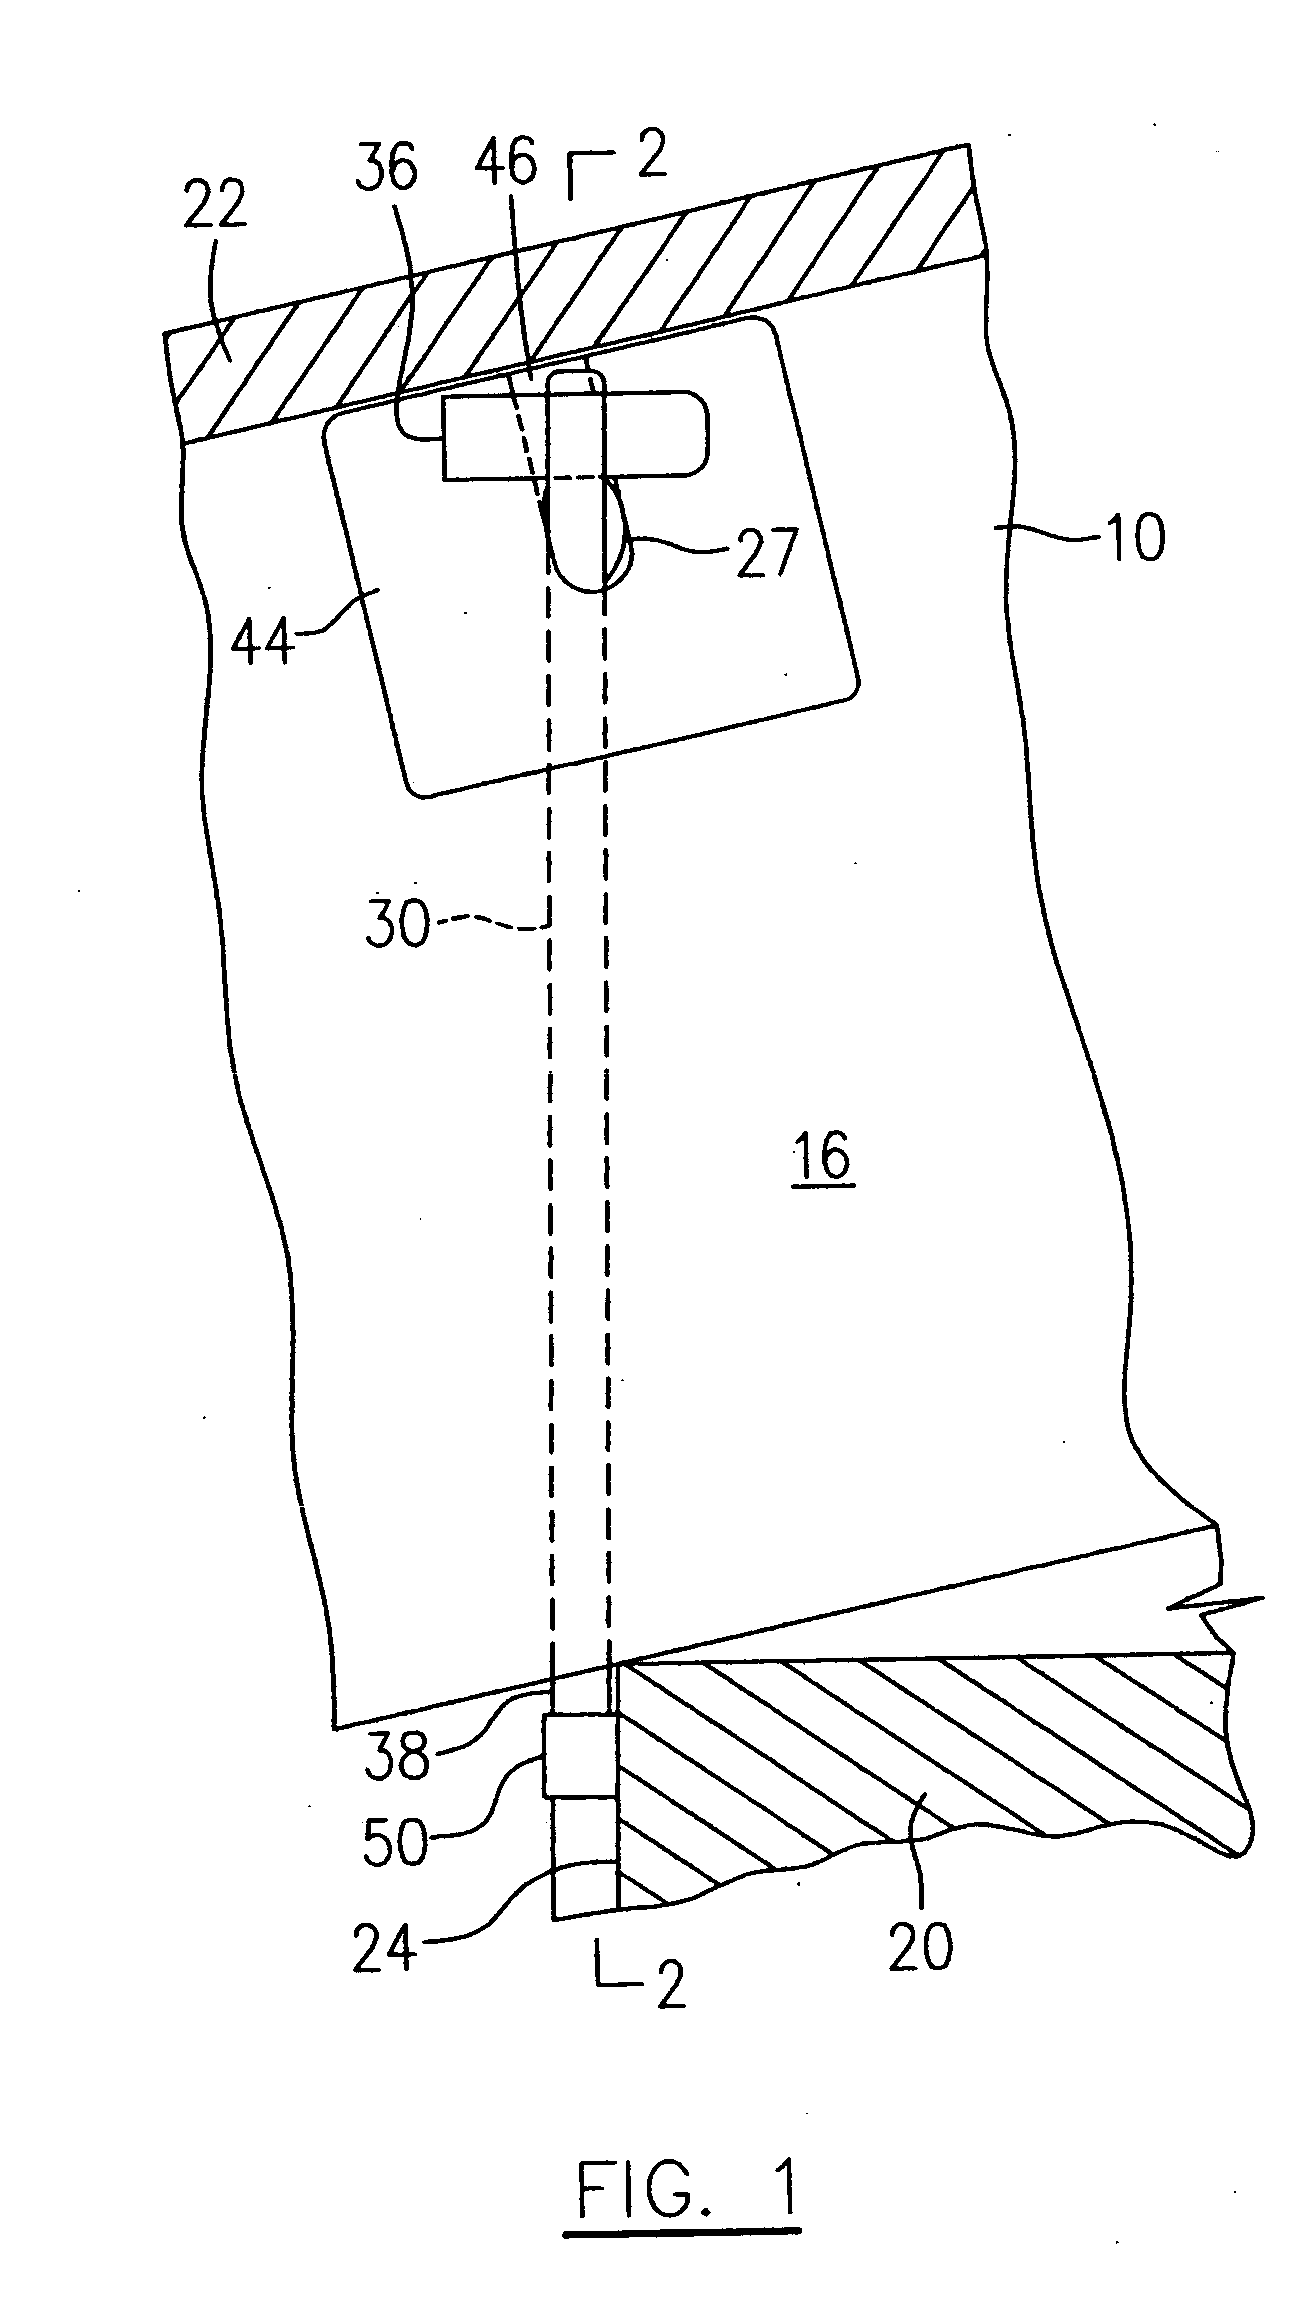 Retrofitting apparatus and method for securing roof frames against winds